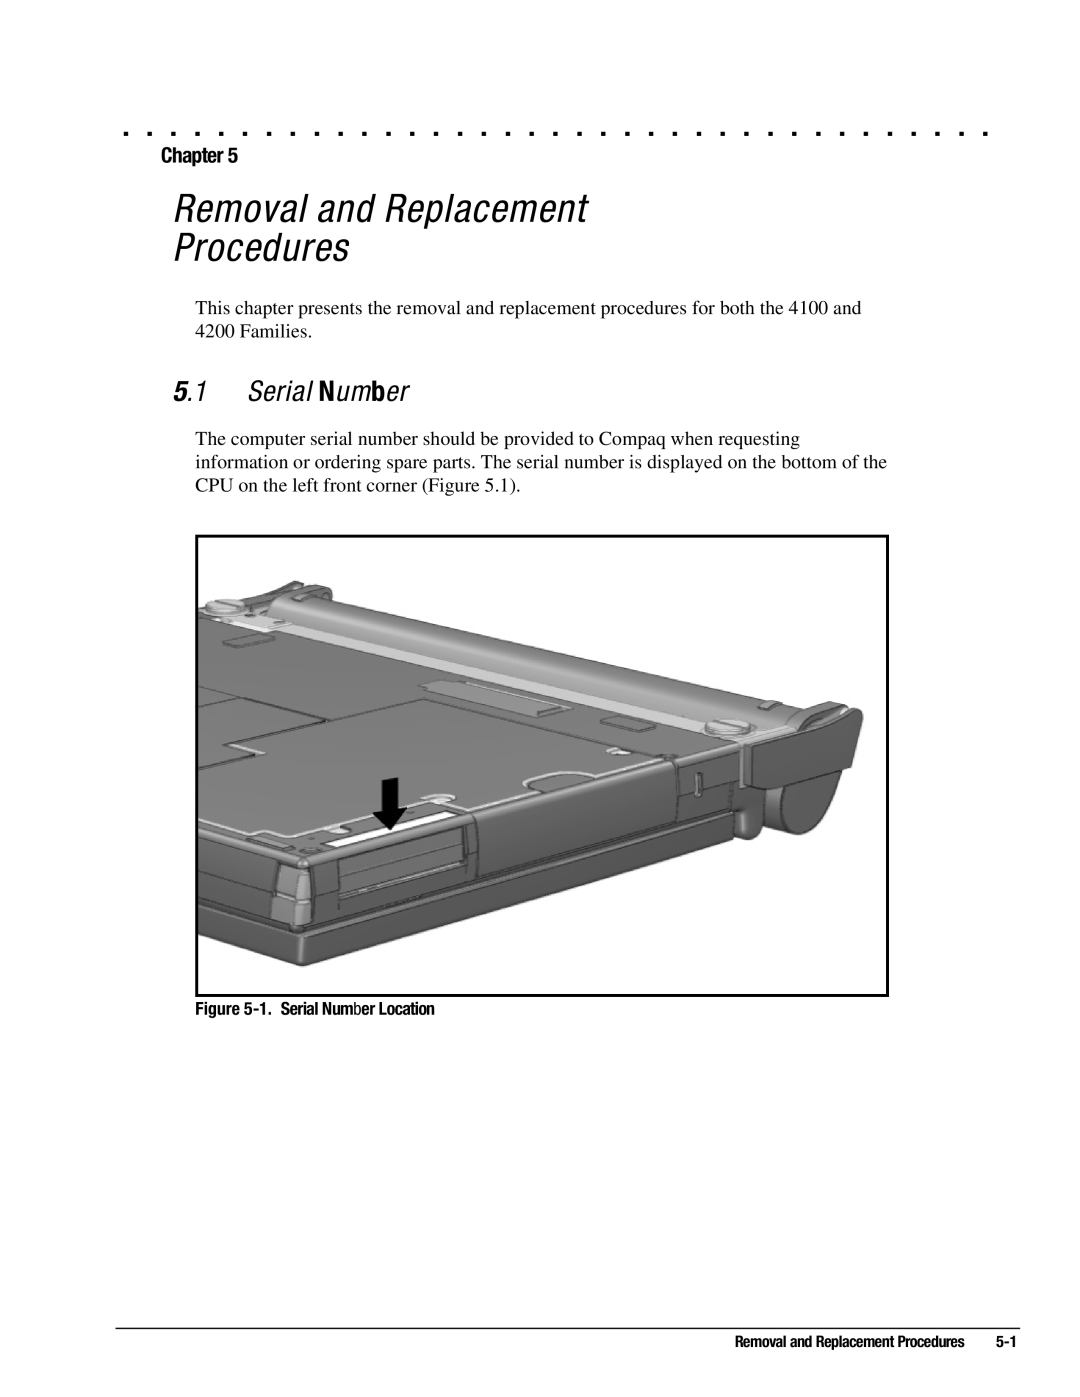 Compaq 4125T, 4130T, 4150T, 4140T, 4131T, 4200, 4160T SLIMLINE Removal and Replacement Procedures, Serial Number, Chapter 